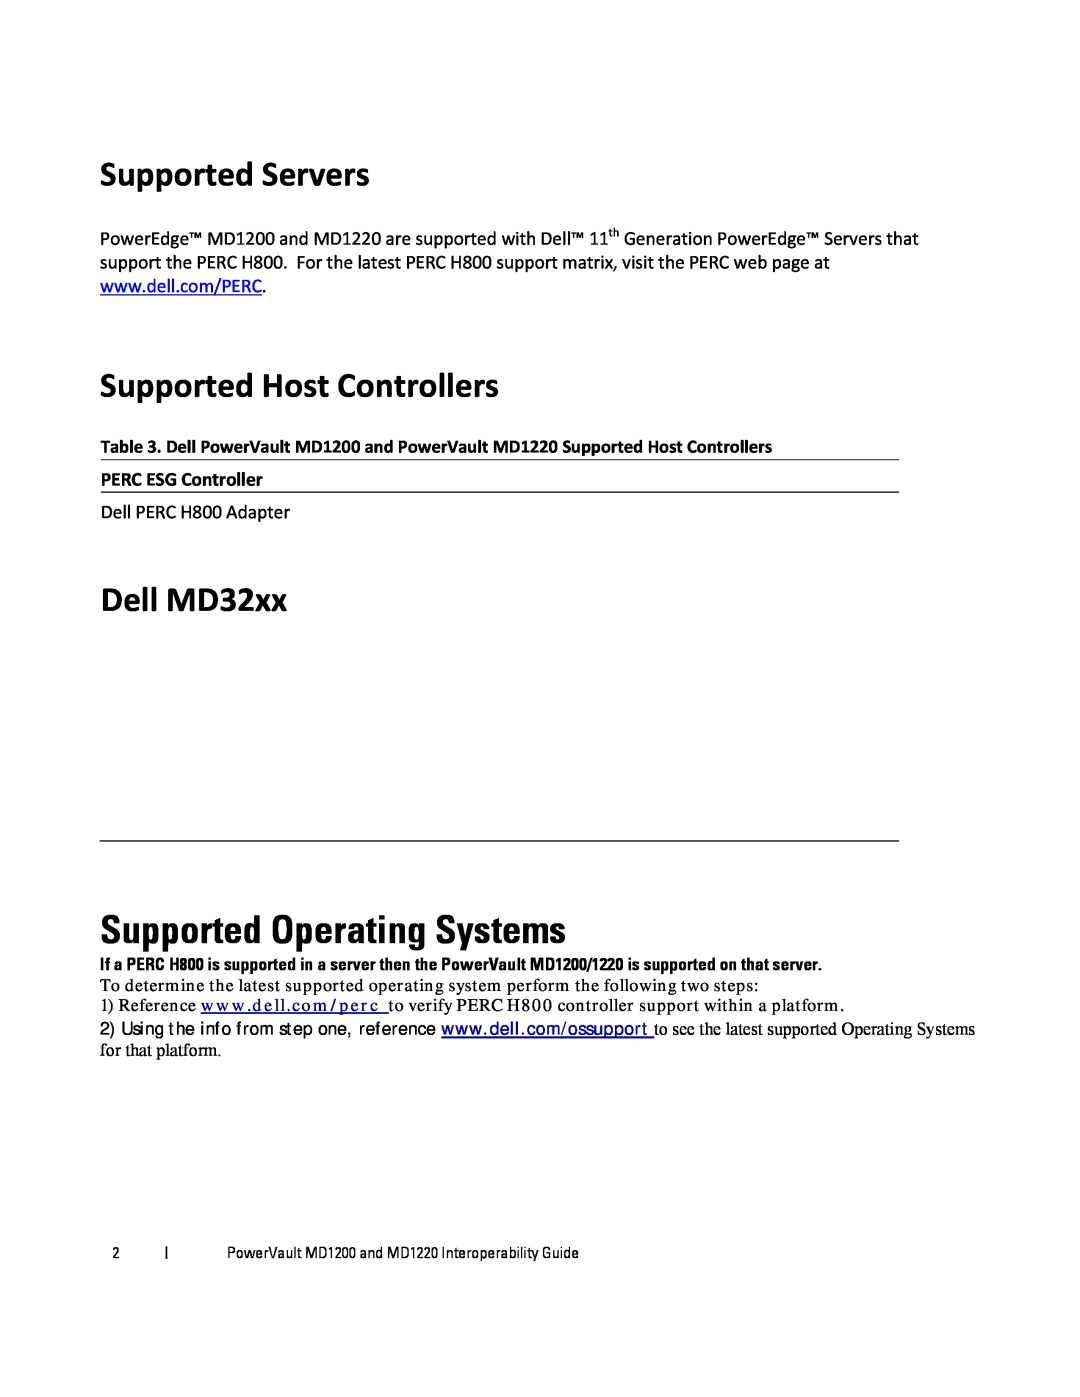 Dell MD1200 Supported Servers, Supported Host Controllers, Dell MD32xx, Supported Operating Systems, PERC ESG Controller 